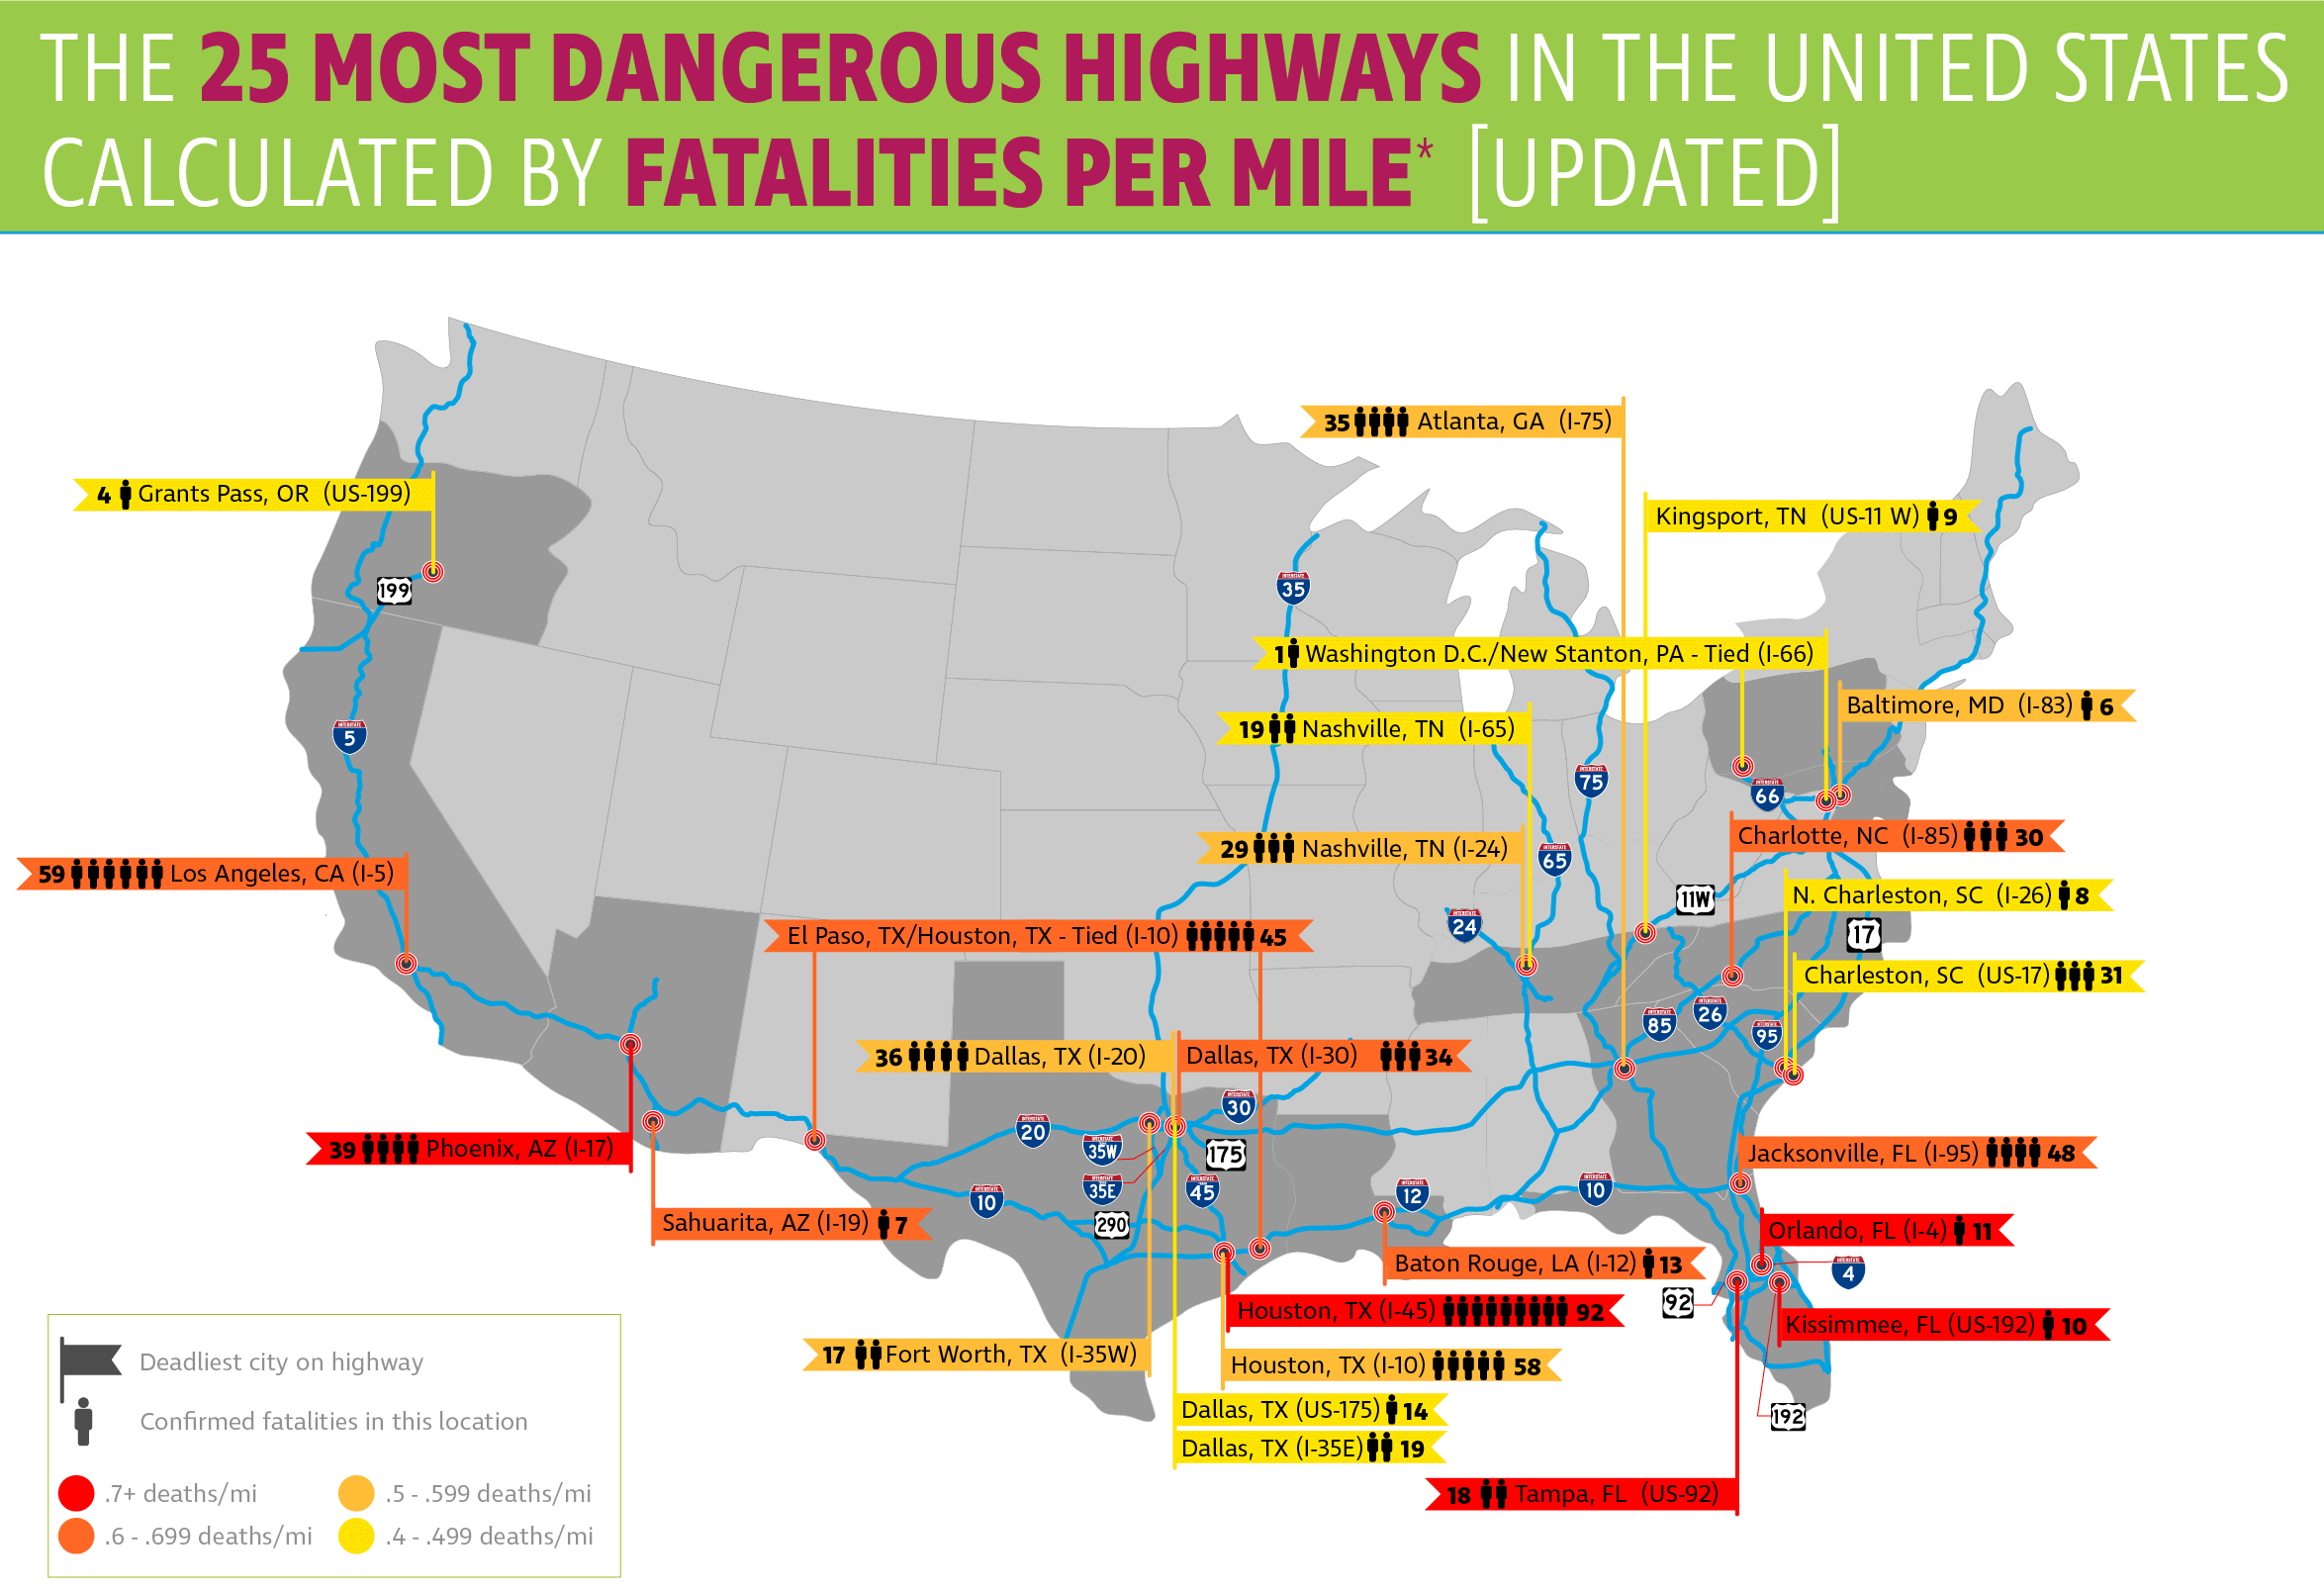 25 Most Dangerous Highways in the United States [Infographic]